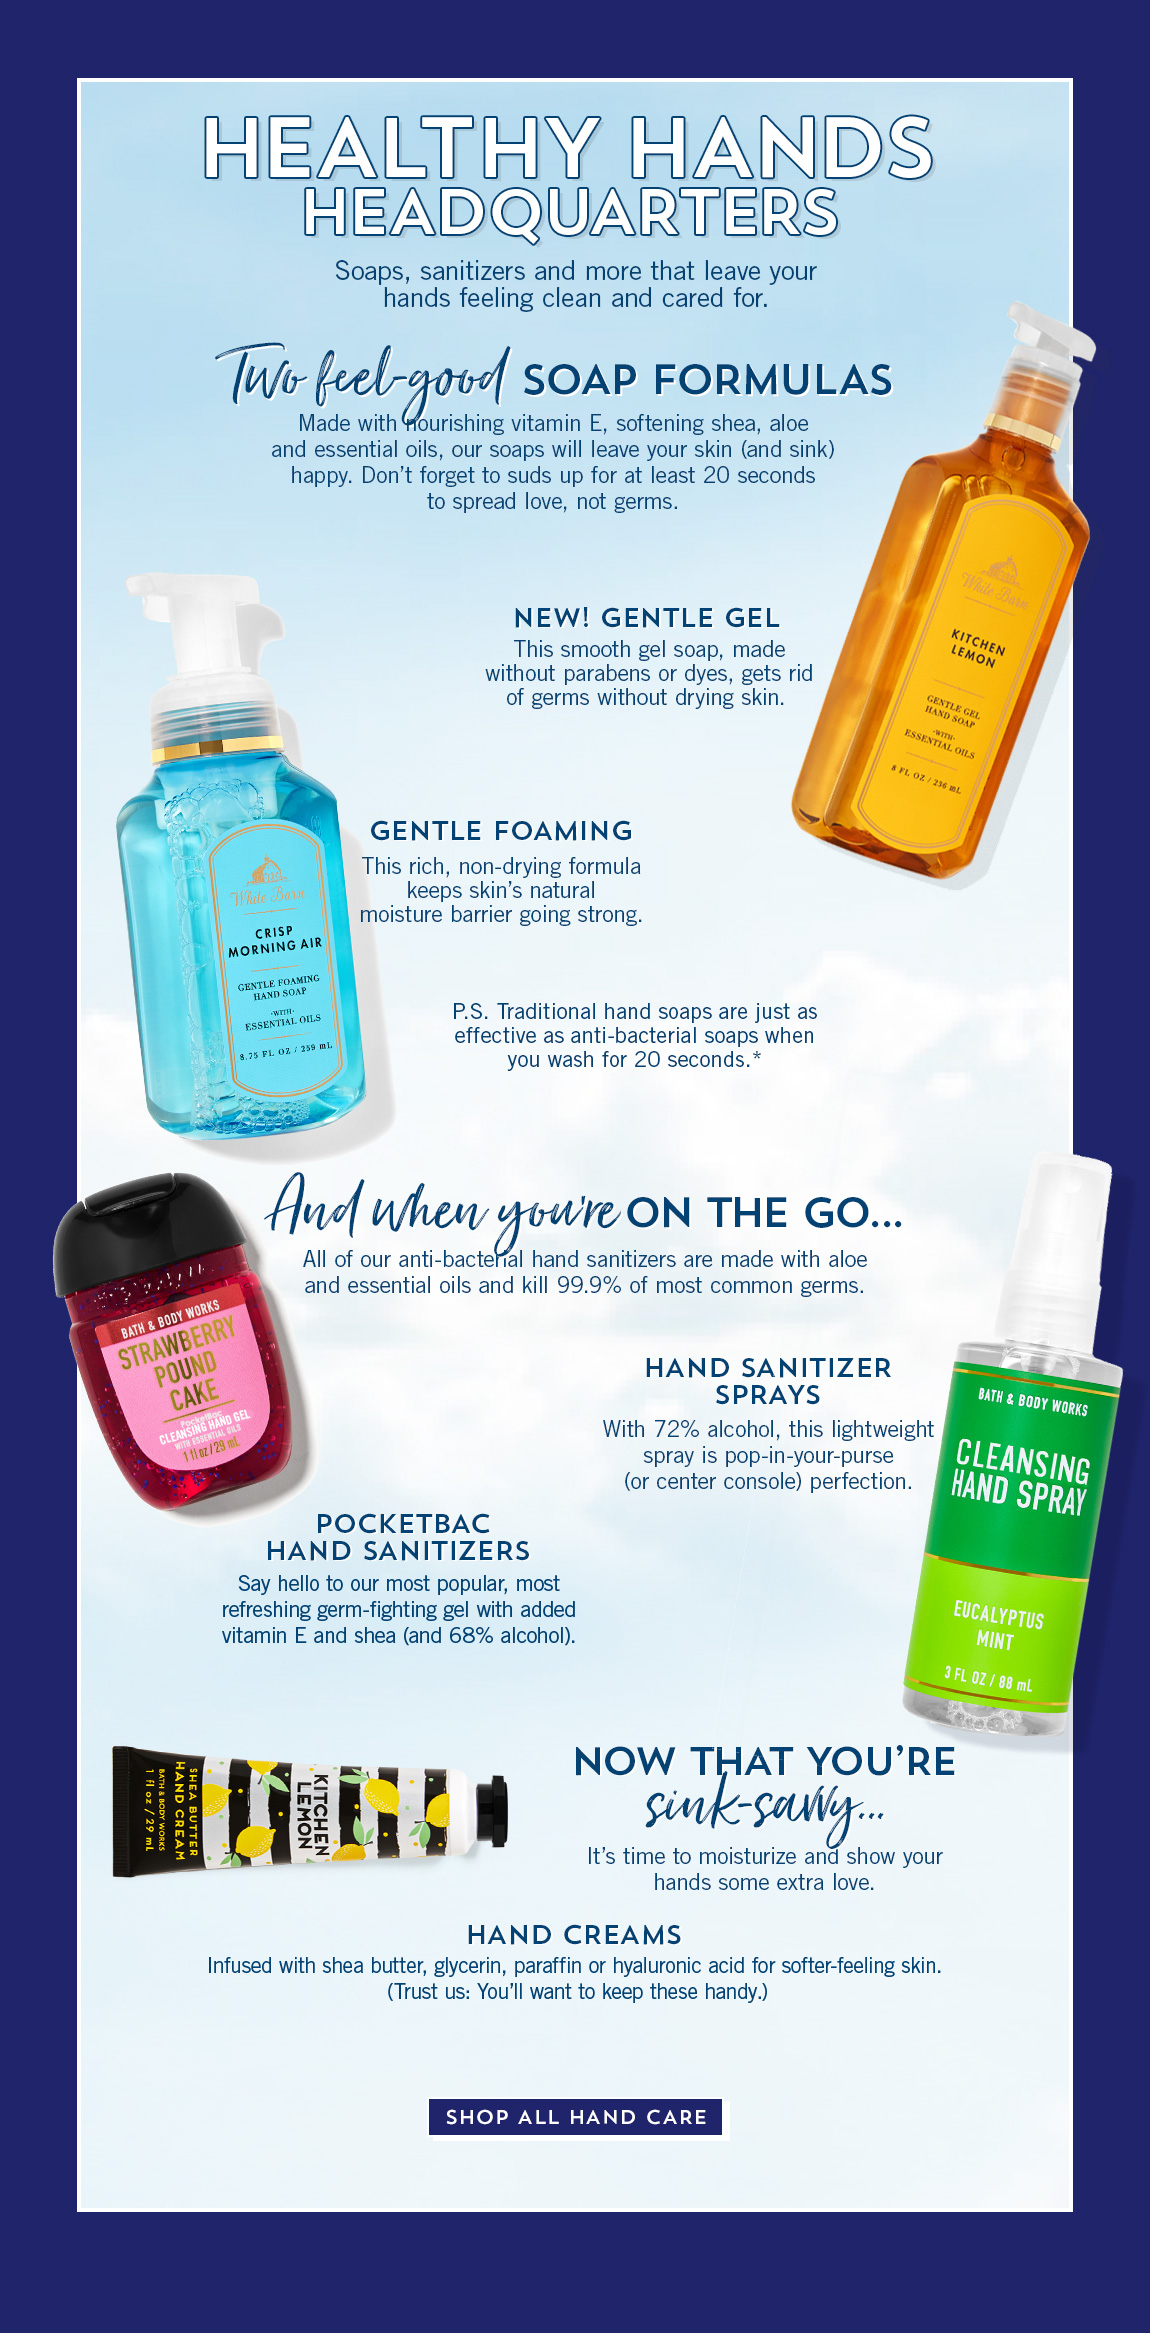 HAND SOAPS & SANITIZERS Online